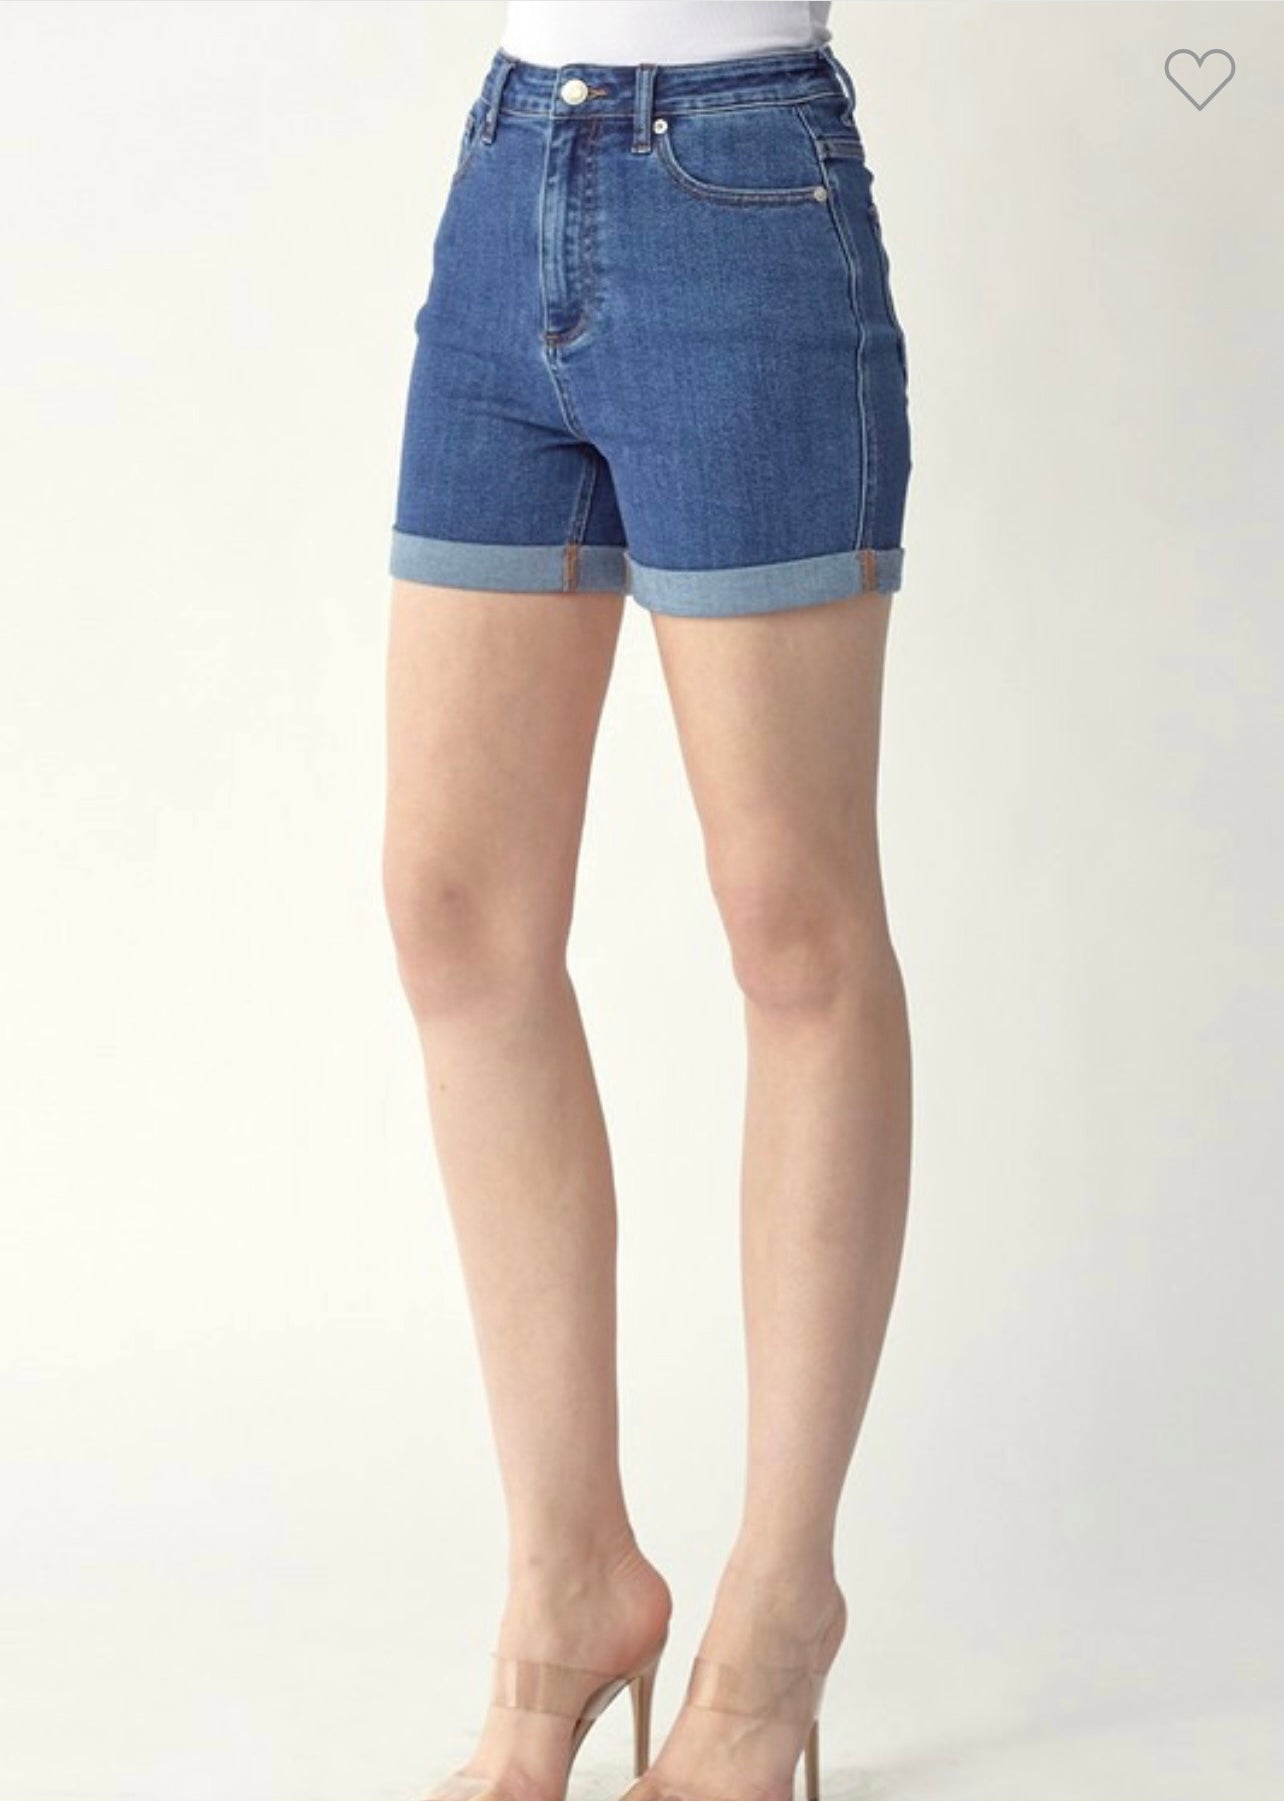 Risen Jean Shorts-Happy Campers Boutique-Happy Campers Boutique, Women's Fashion and More in Plainwell, MI